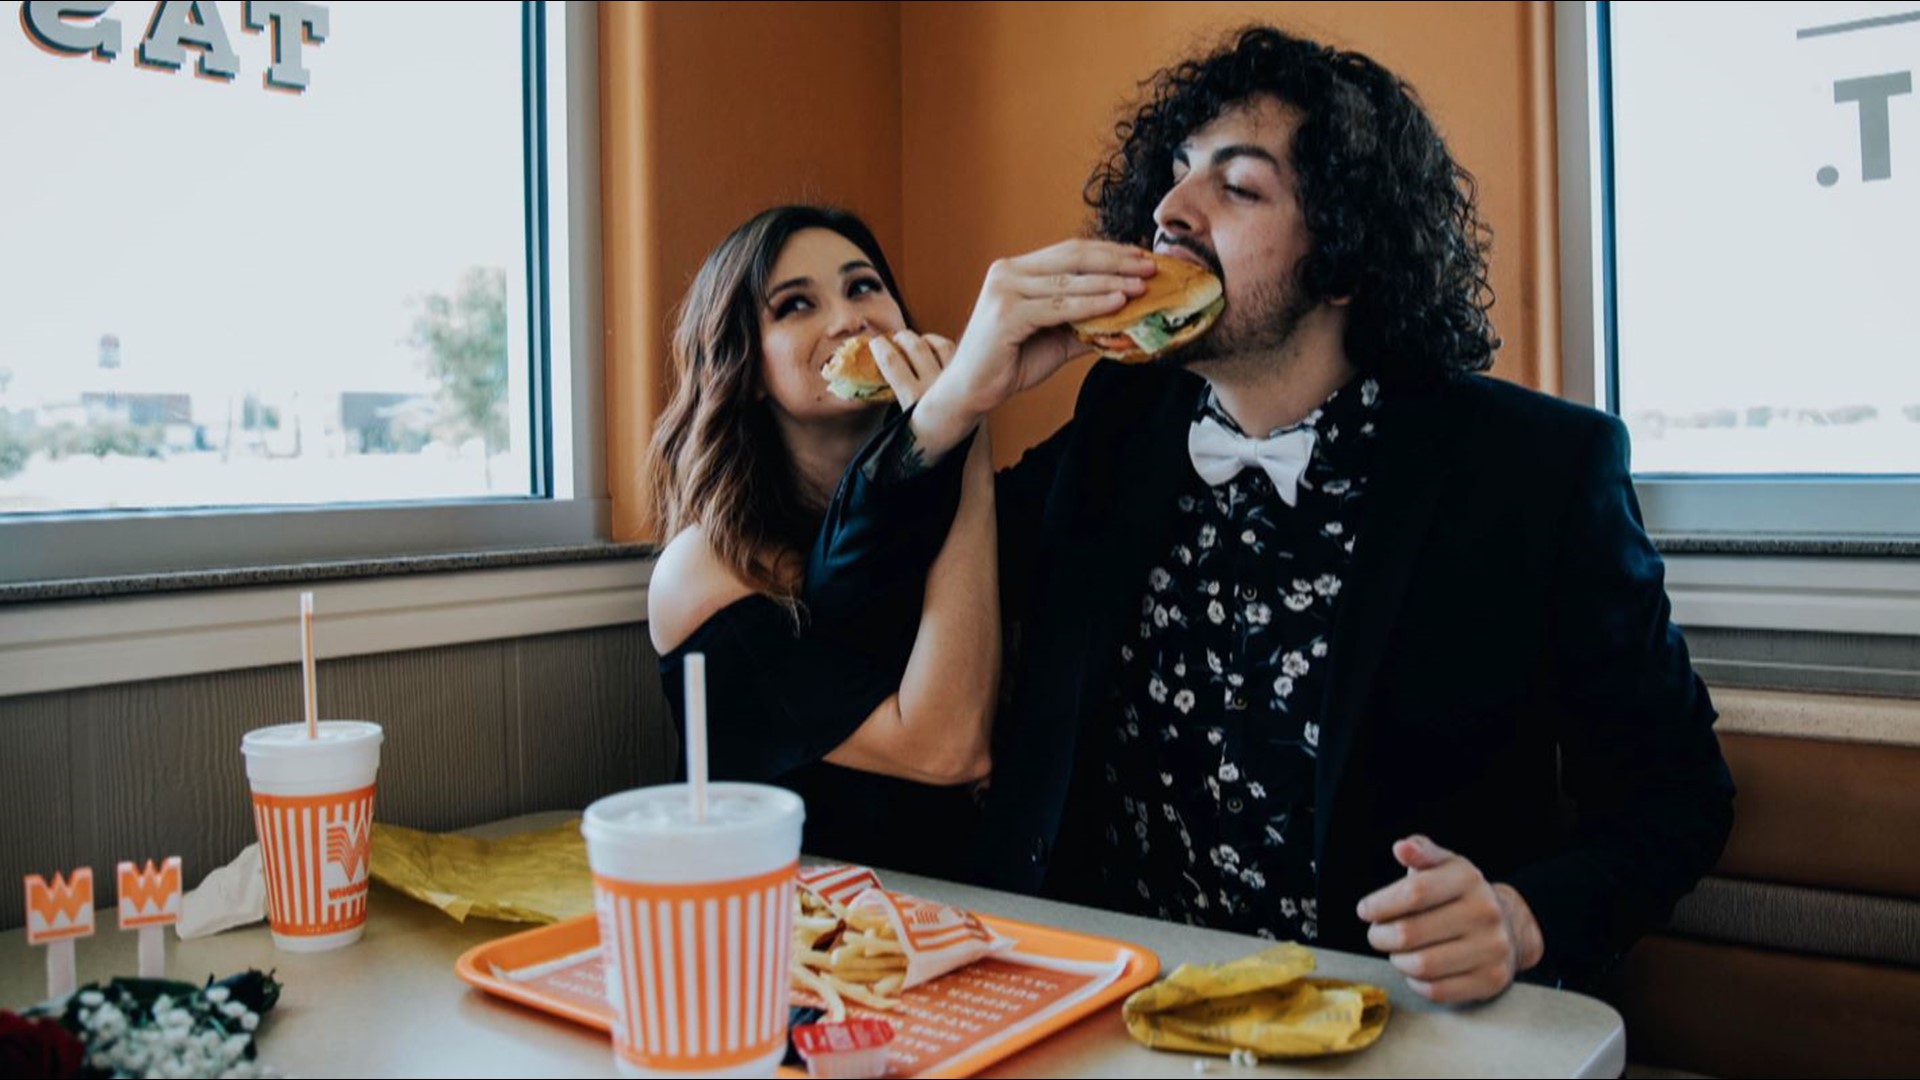 The pandemic might have delayed their wedding, but Danny and Alex didn't let that stop them from expressing their love for one another... and for a good burger.